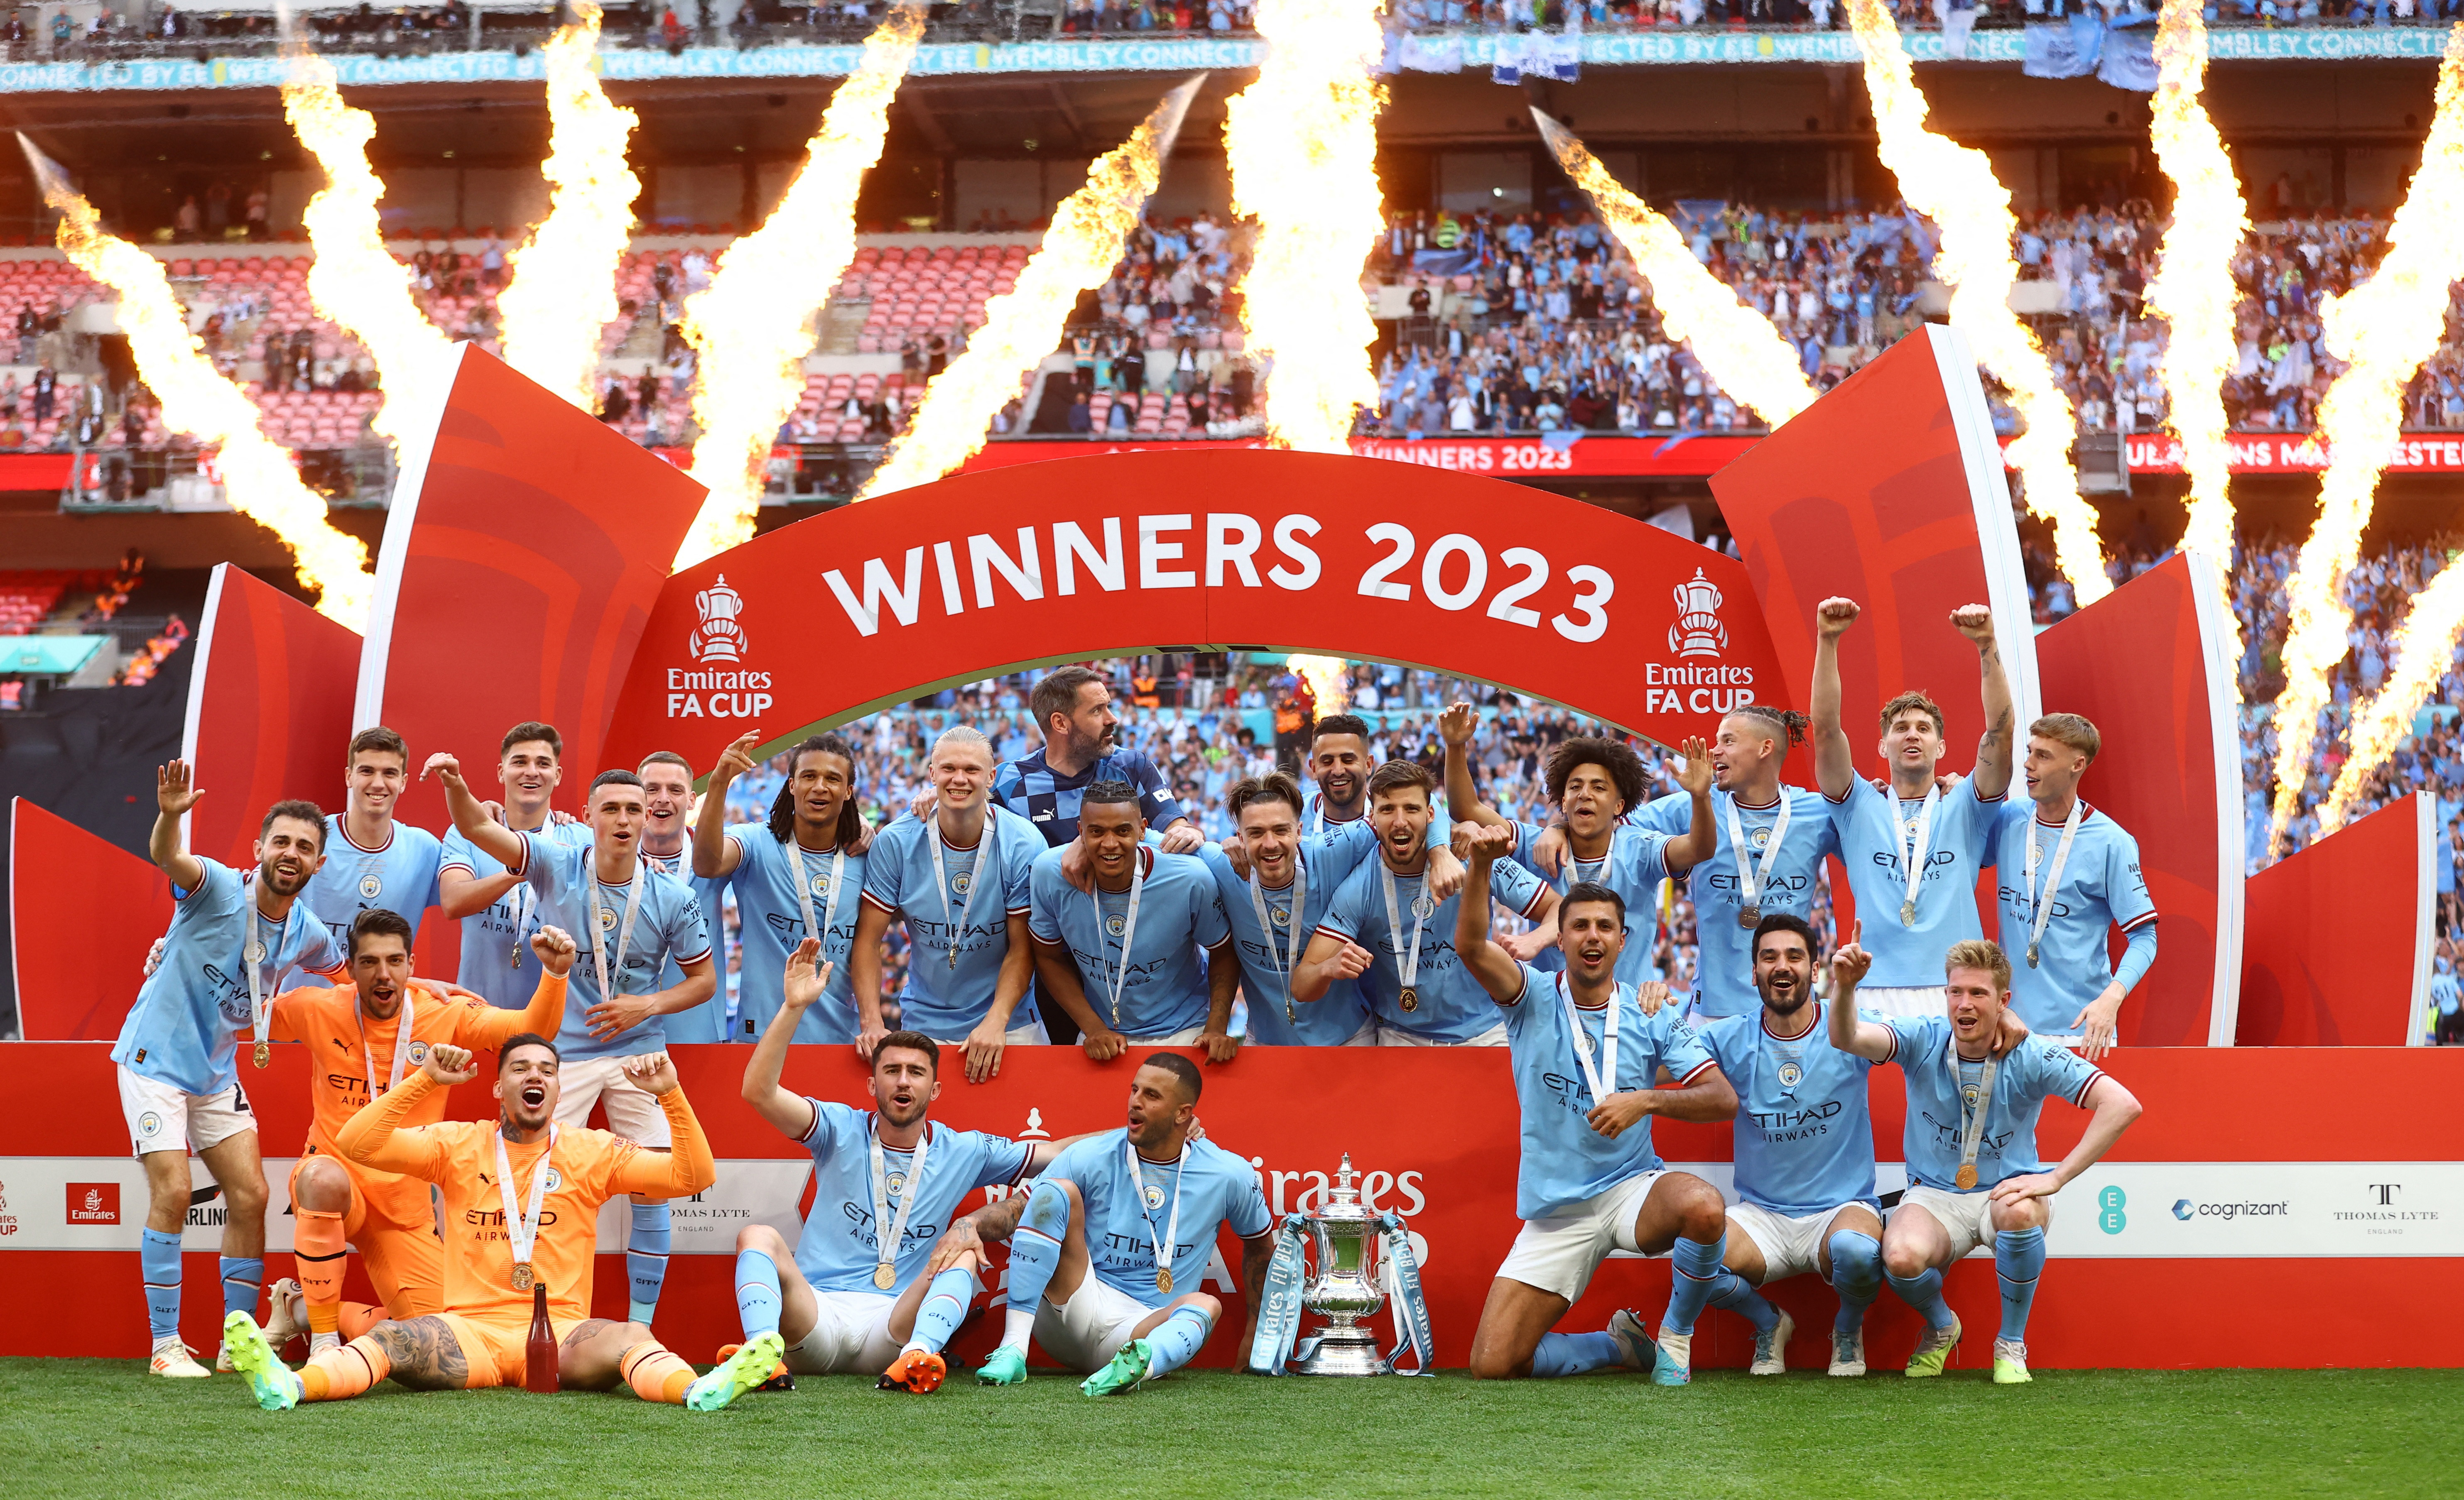 Soccer Football - FA Cup Final - Manchester City v Manchester United - Wembley Stadium, London, Britain - June 3, 2023 Manchester City players celebrate with the trophy after winning the FA Cup REUTERS/Carl Recine